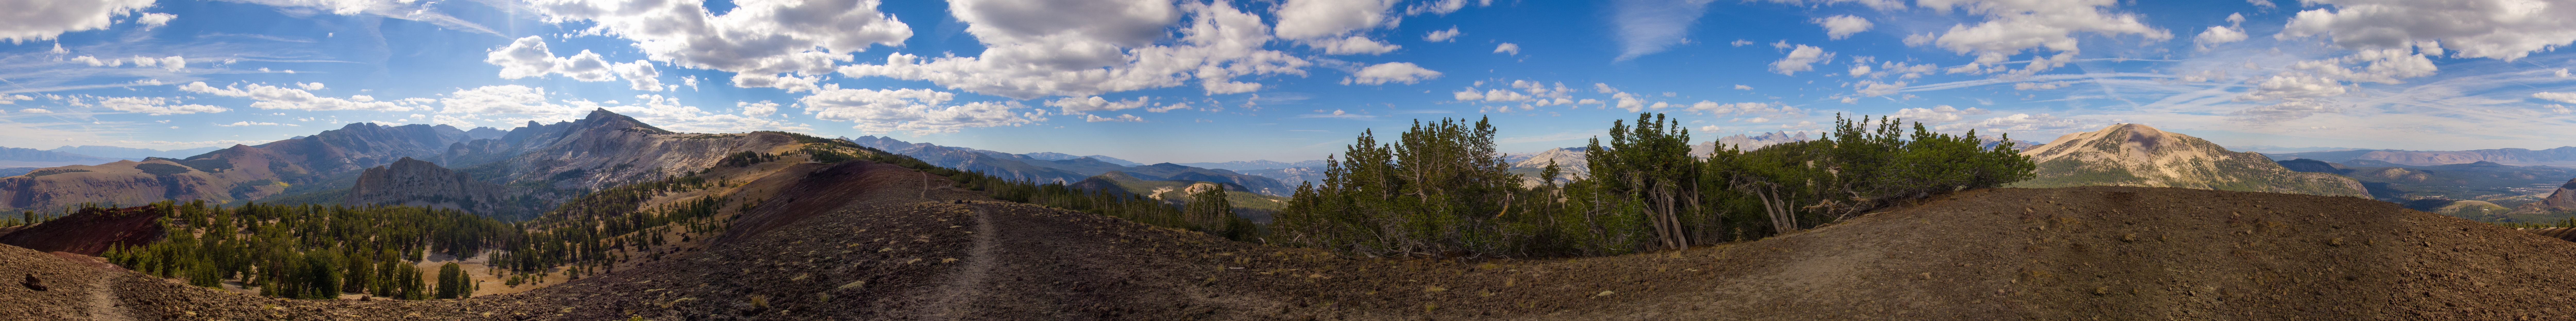 Mammoth Crest is the summit at the left.  At the right is Mammoth Mountain.  <br />Photo courtesy of Frank Paysen